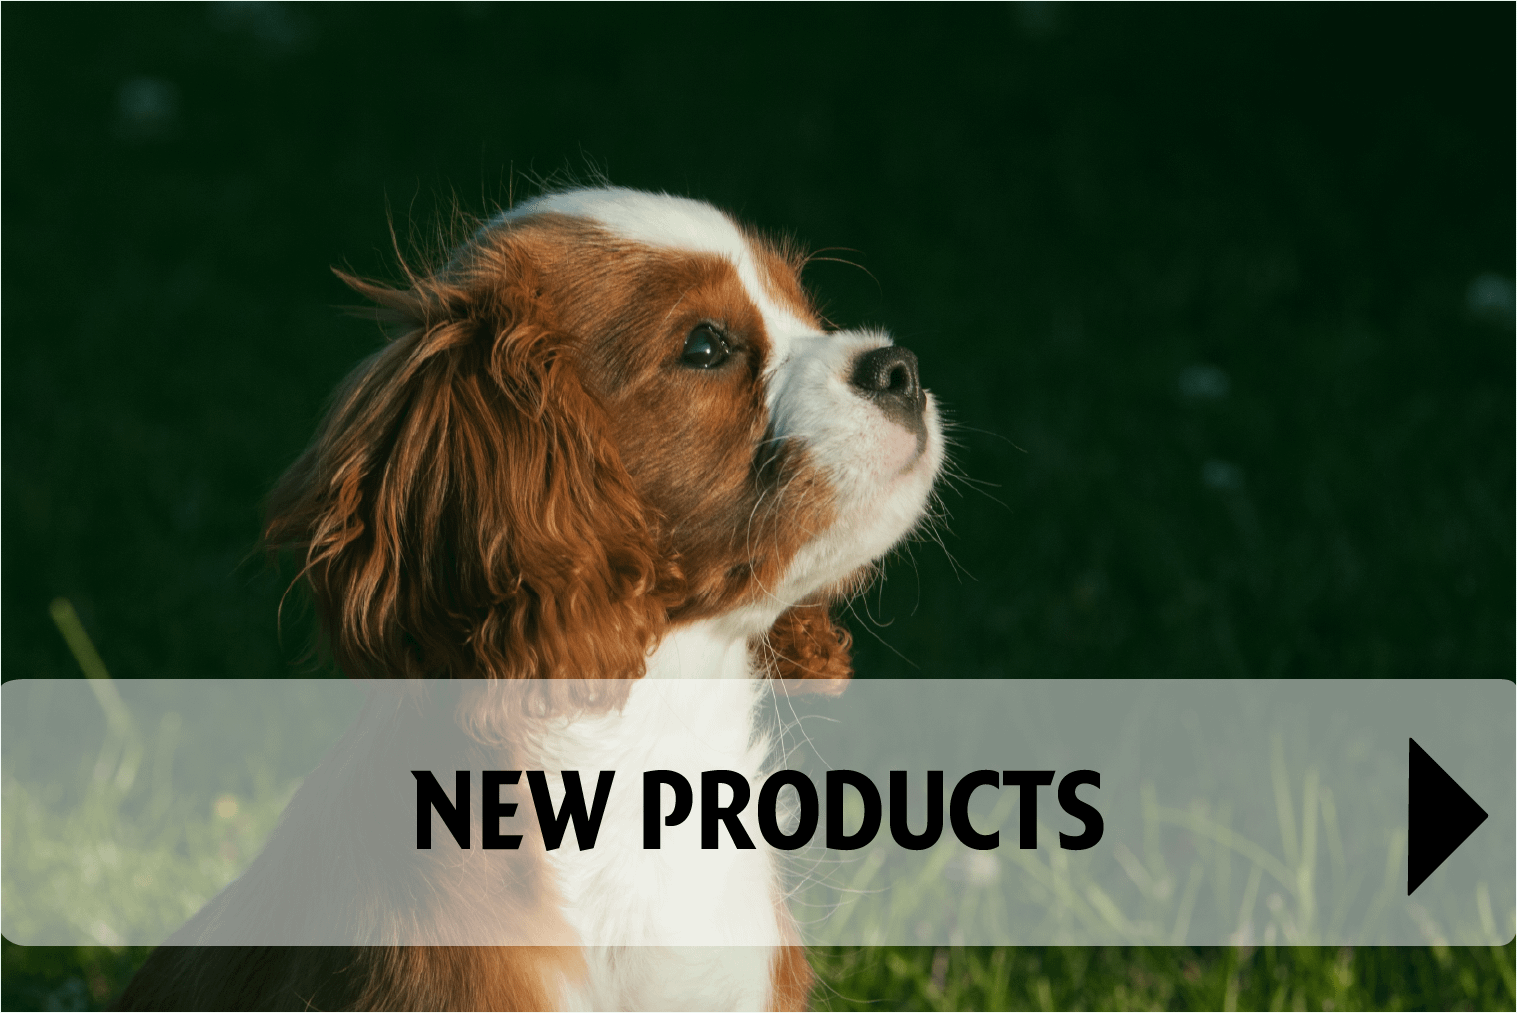 new products